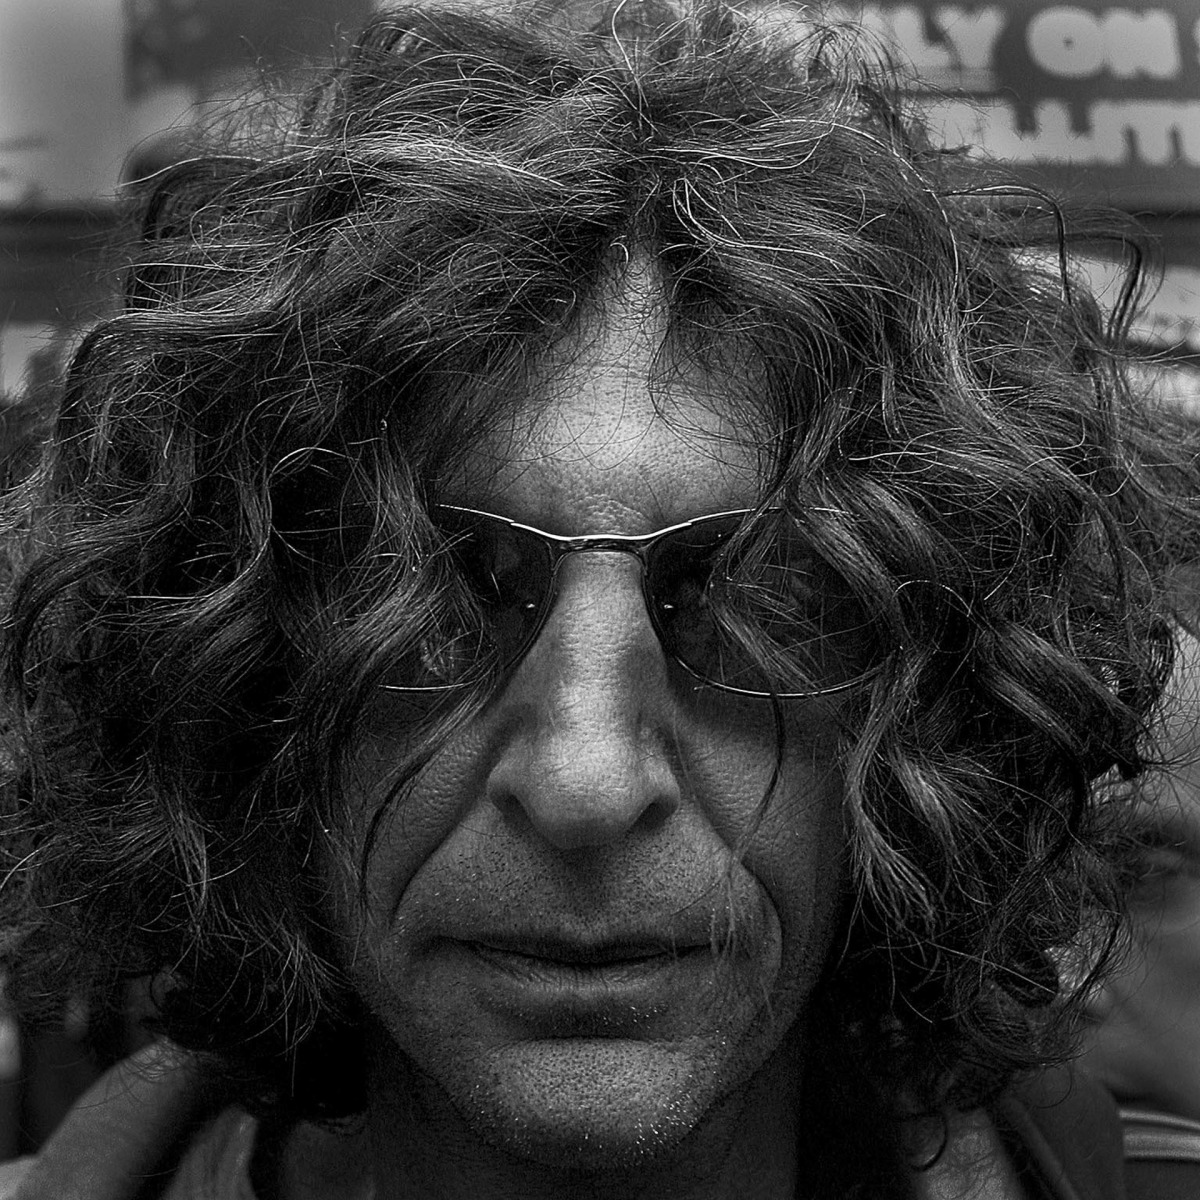 Howard Stern at an event on Union Square where he distributed Sirius Boomboxes to celebrate his move to the digital radio station.